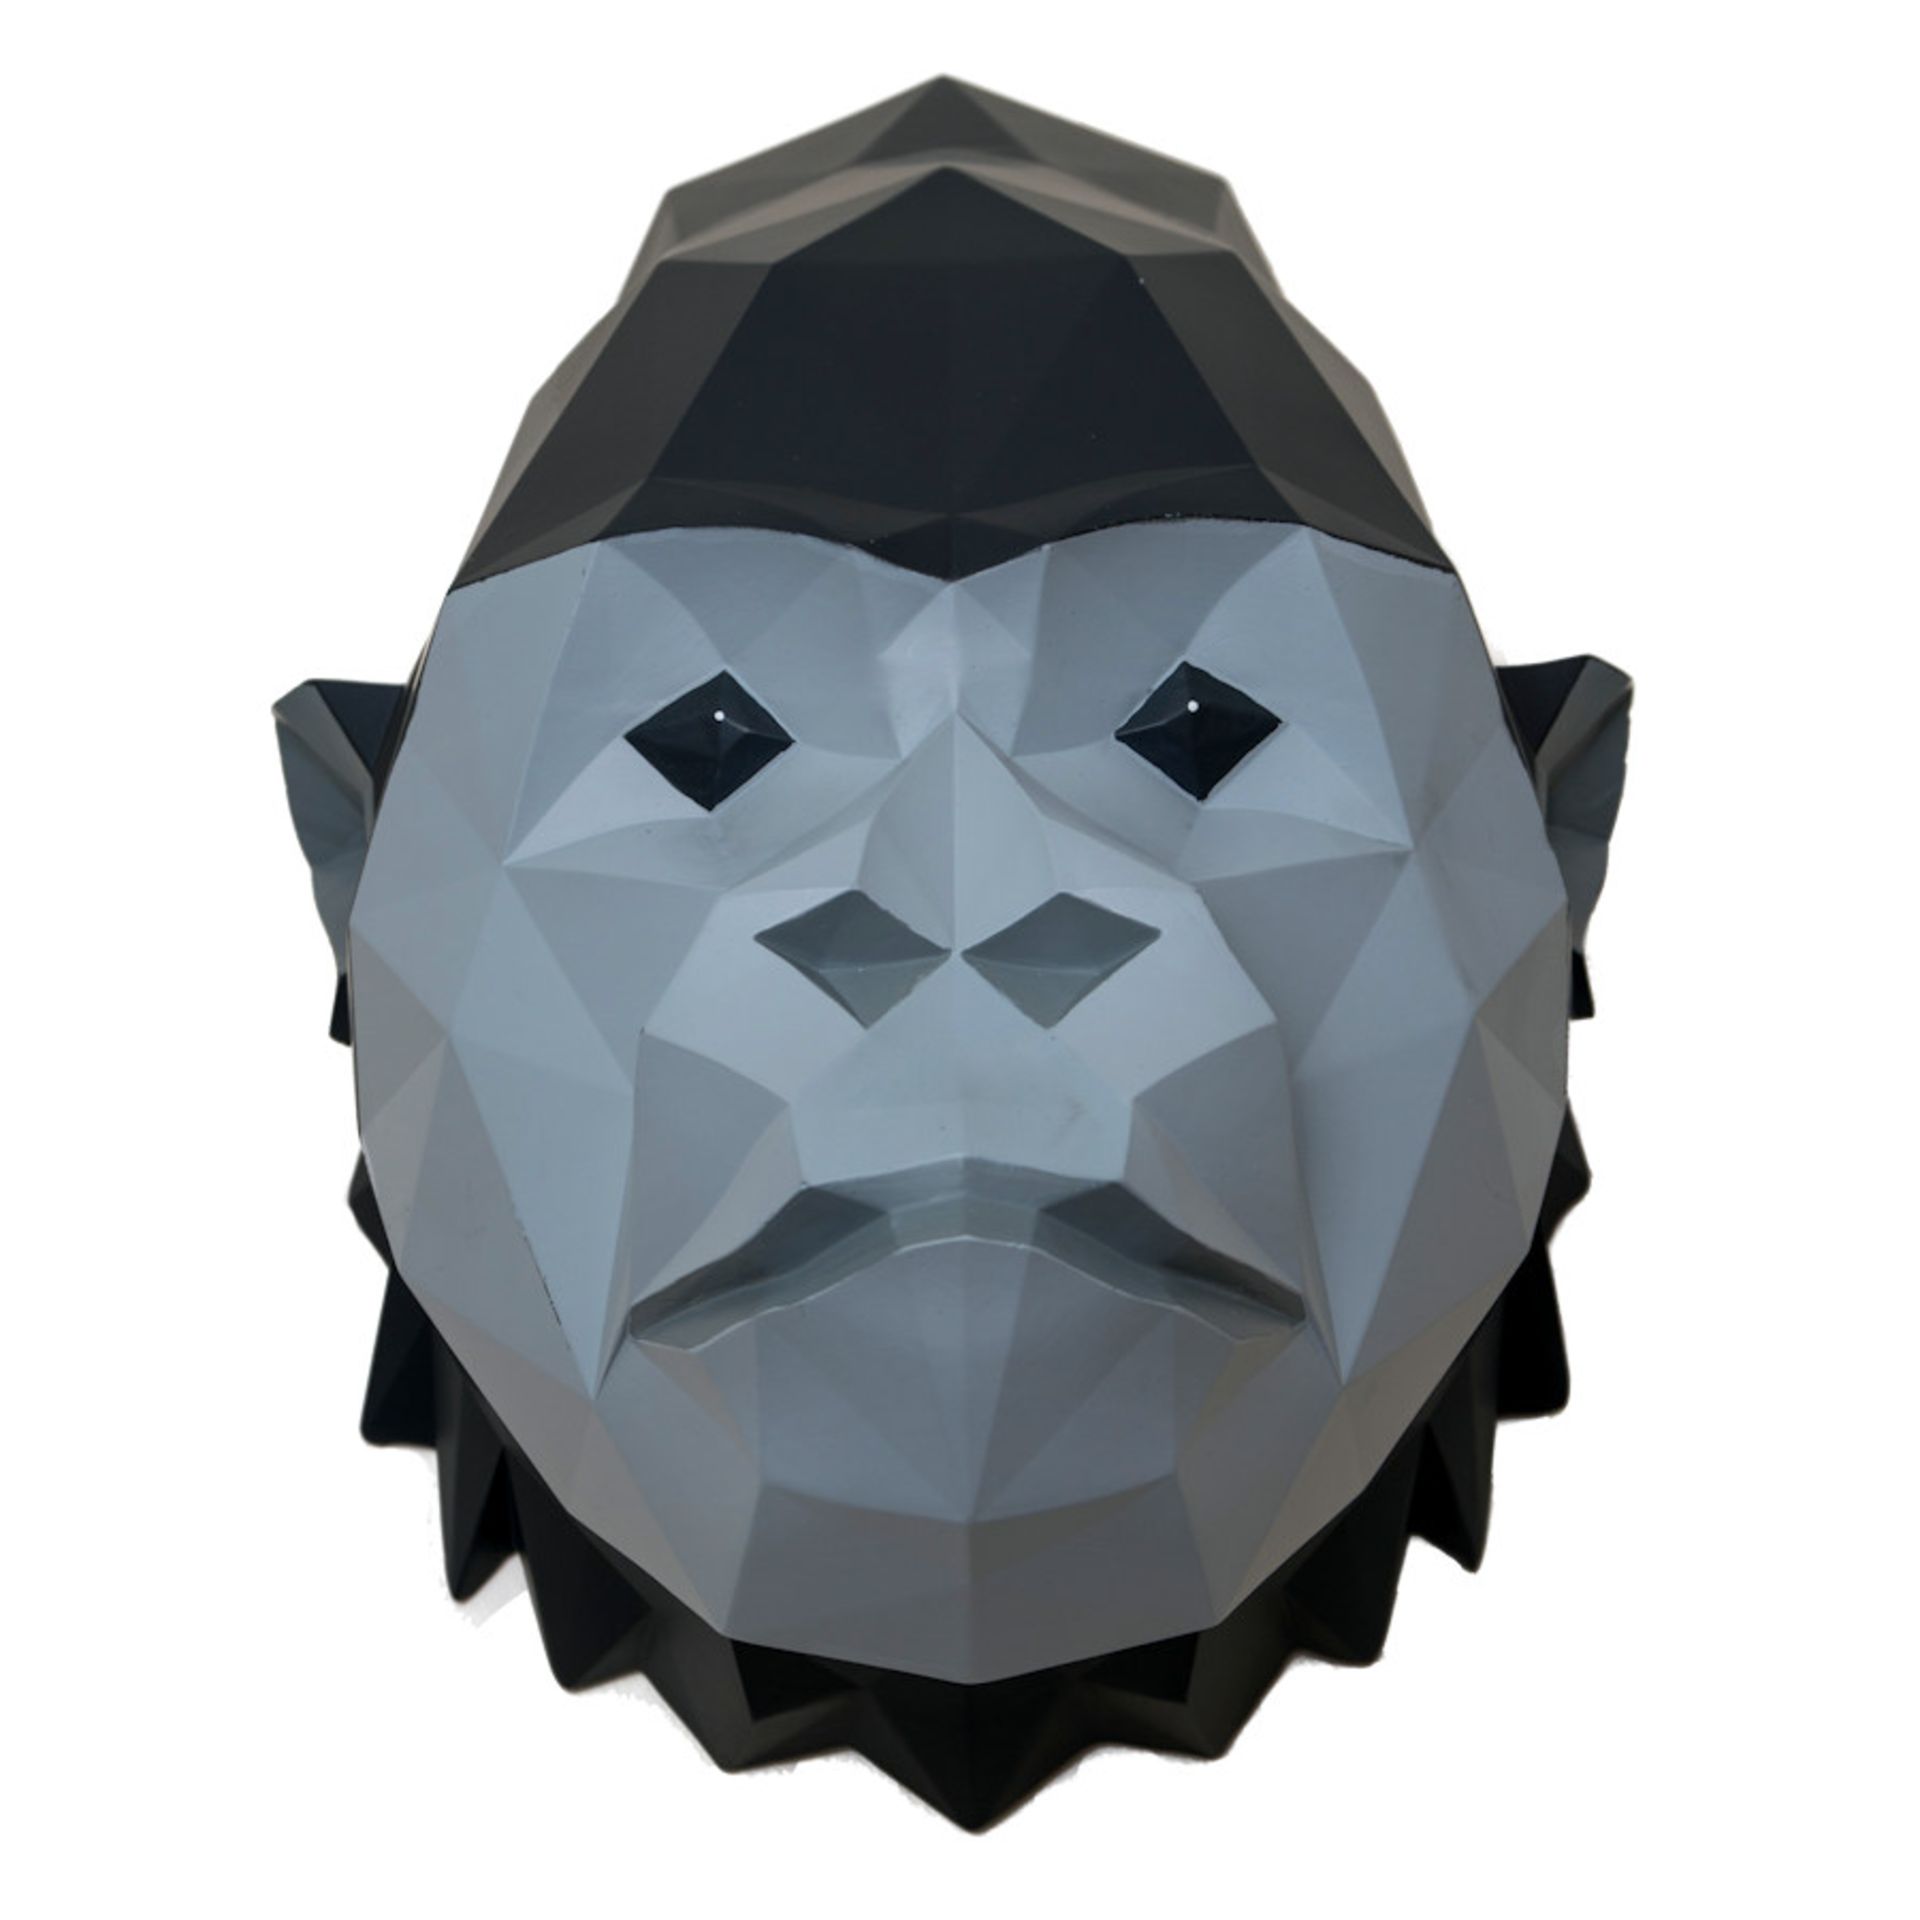 1 x Artistic Origami Gorilla Head Abstract Wall Hanging - Dimensions H37cm W31cm D24cm - Brand New - Image 3 of 3